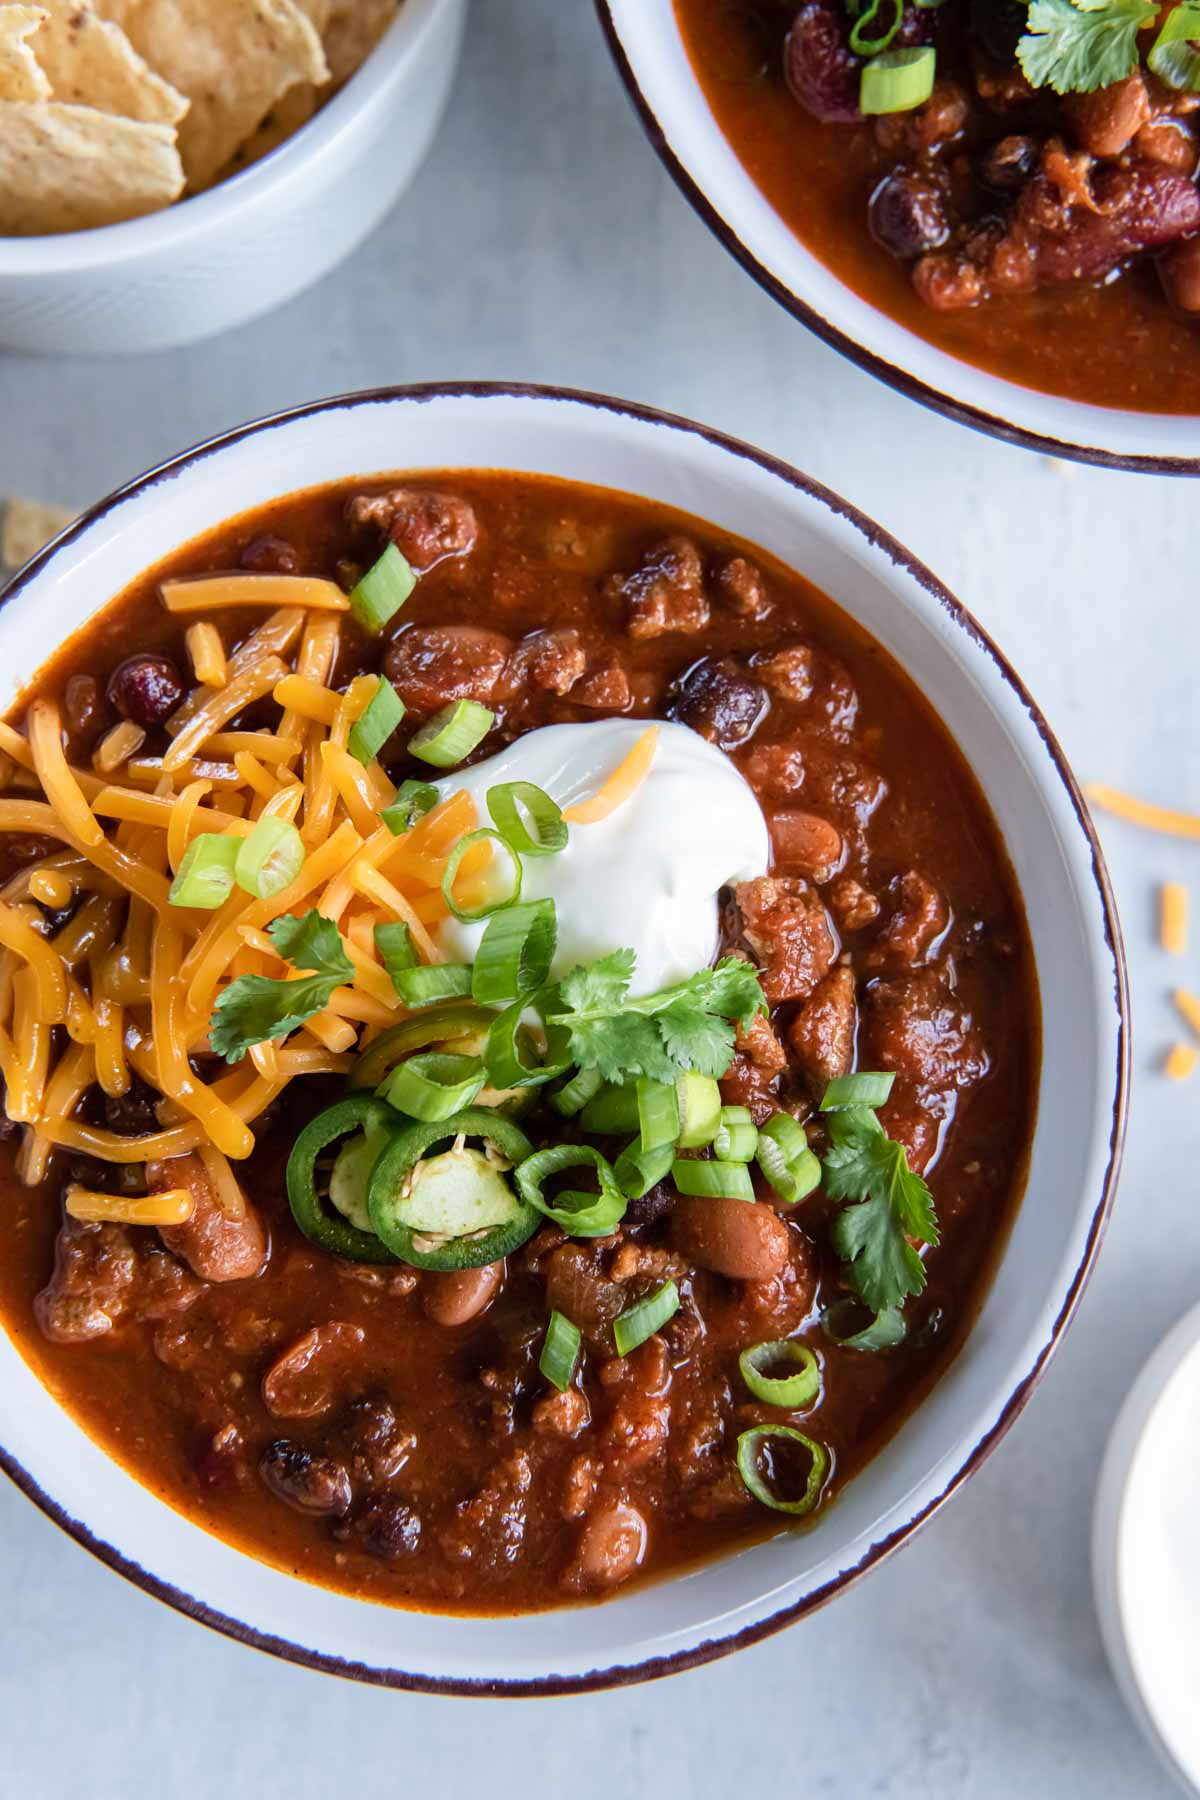 Turkey chili served in a bowl topped with sour cream, shredded cheddar, jalapenos, green onions and cilantro.